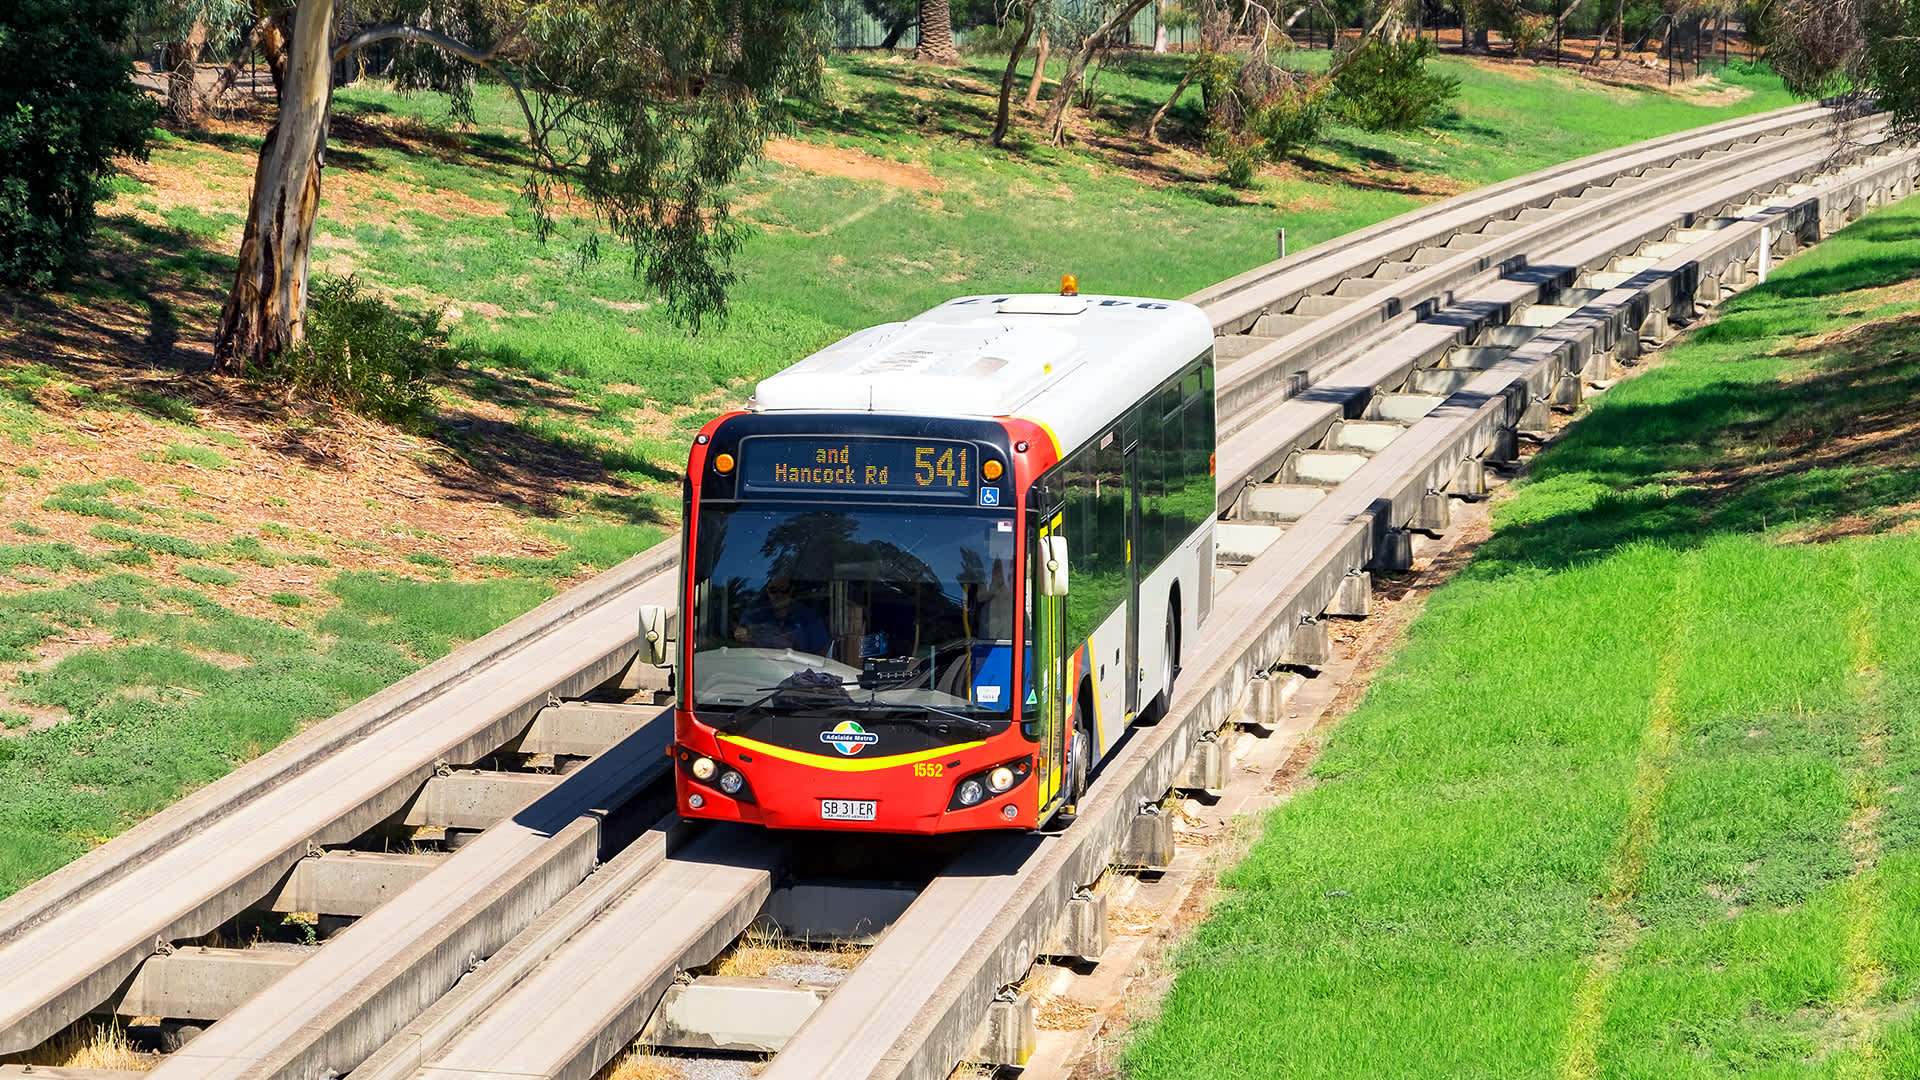 Opened in 1986, the Adelaide Metro bus on Route 541 heads away from the city center along the O-Bahn guided Busway. (Getty Images)